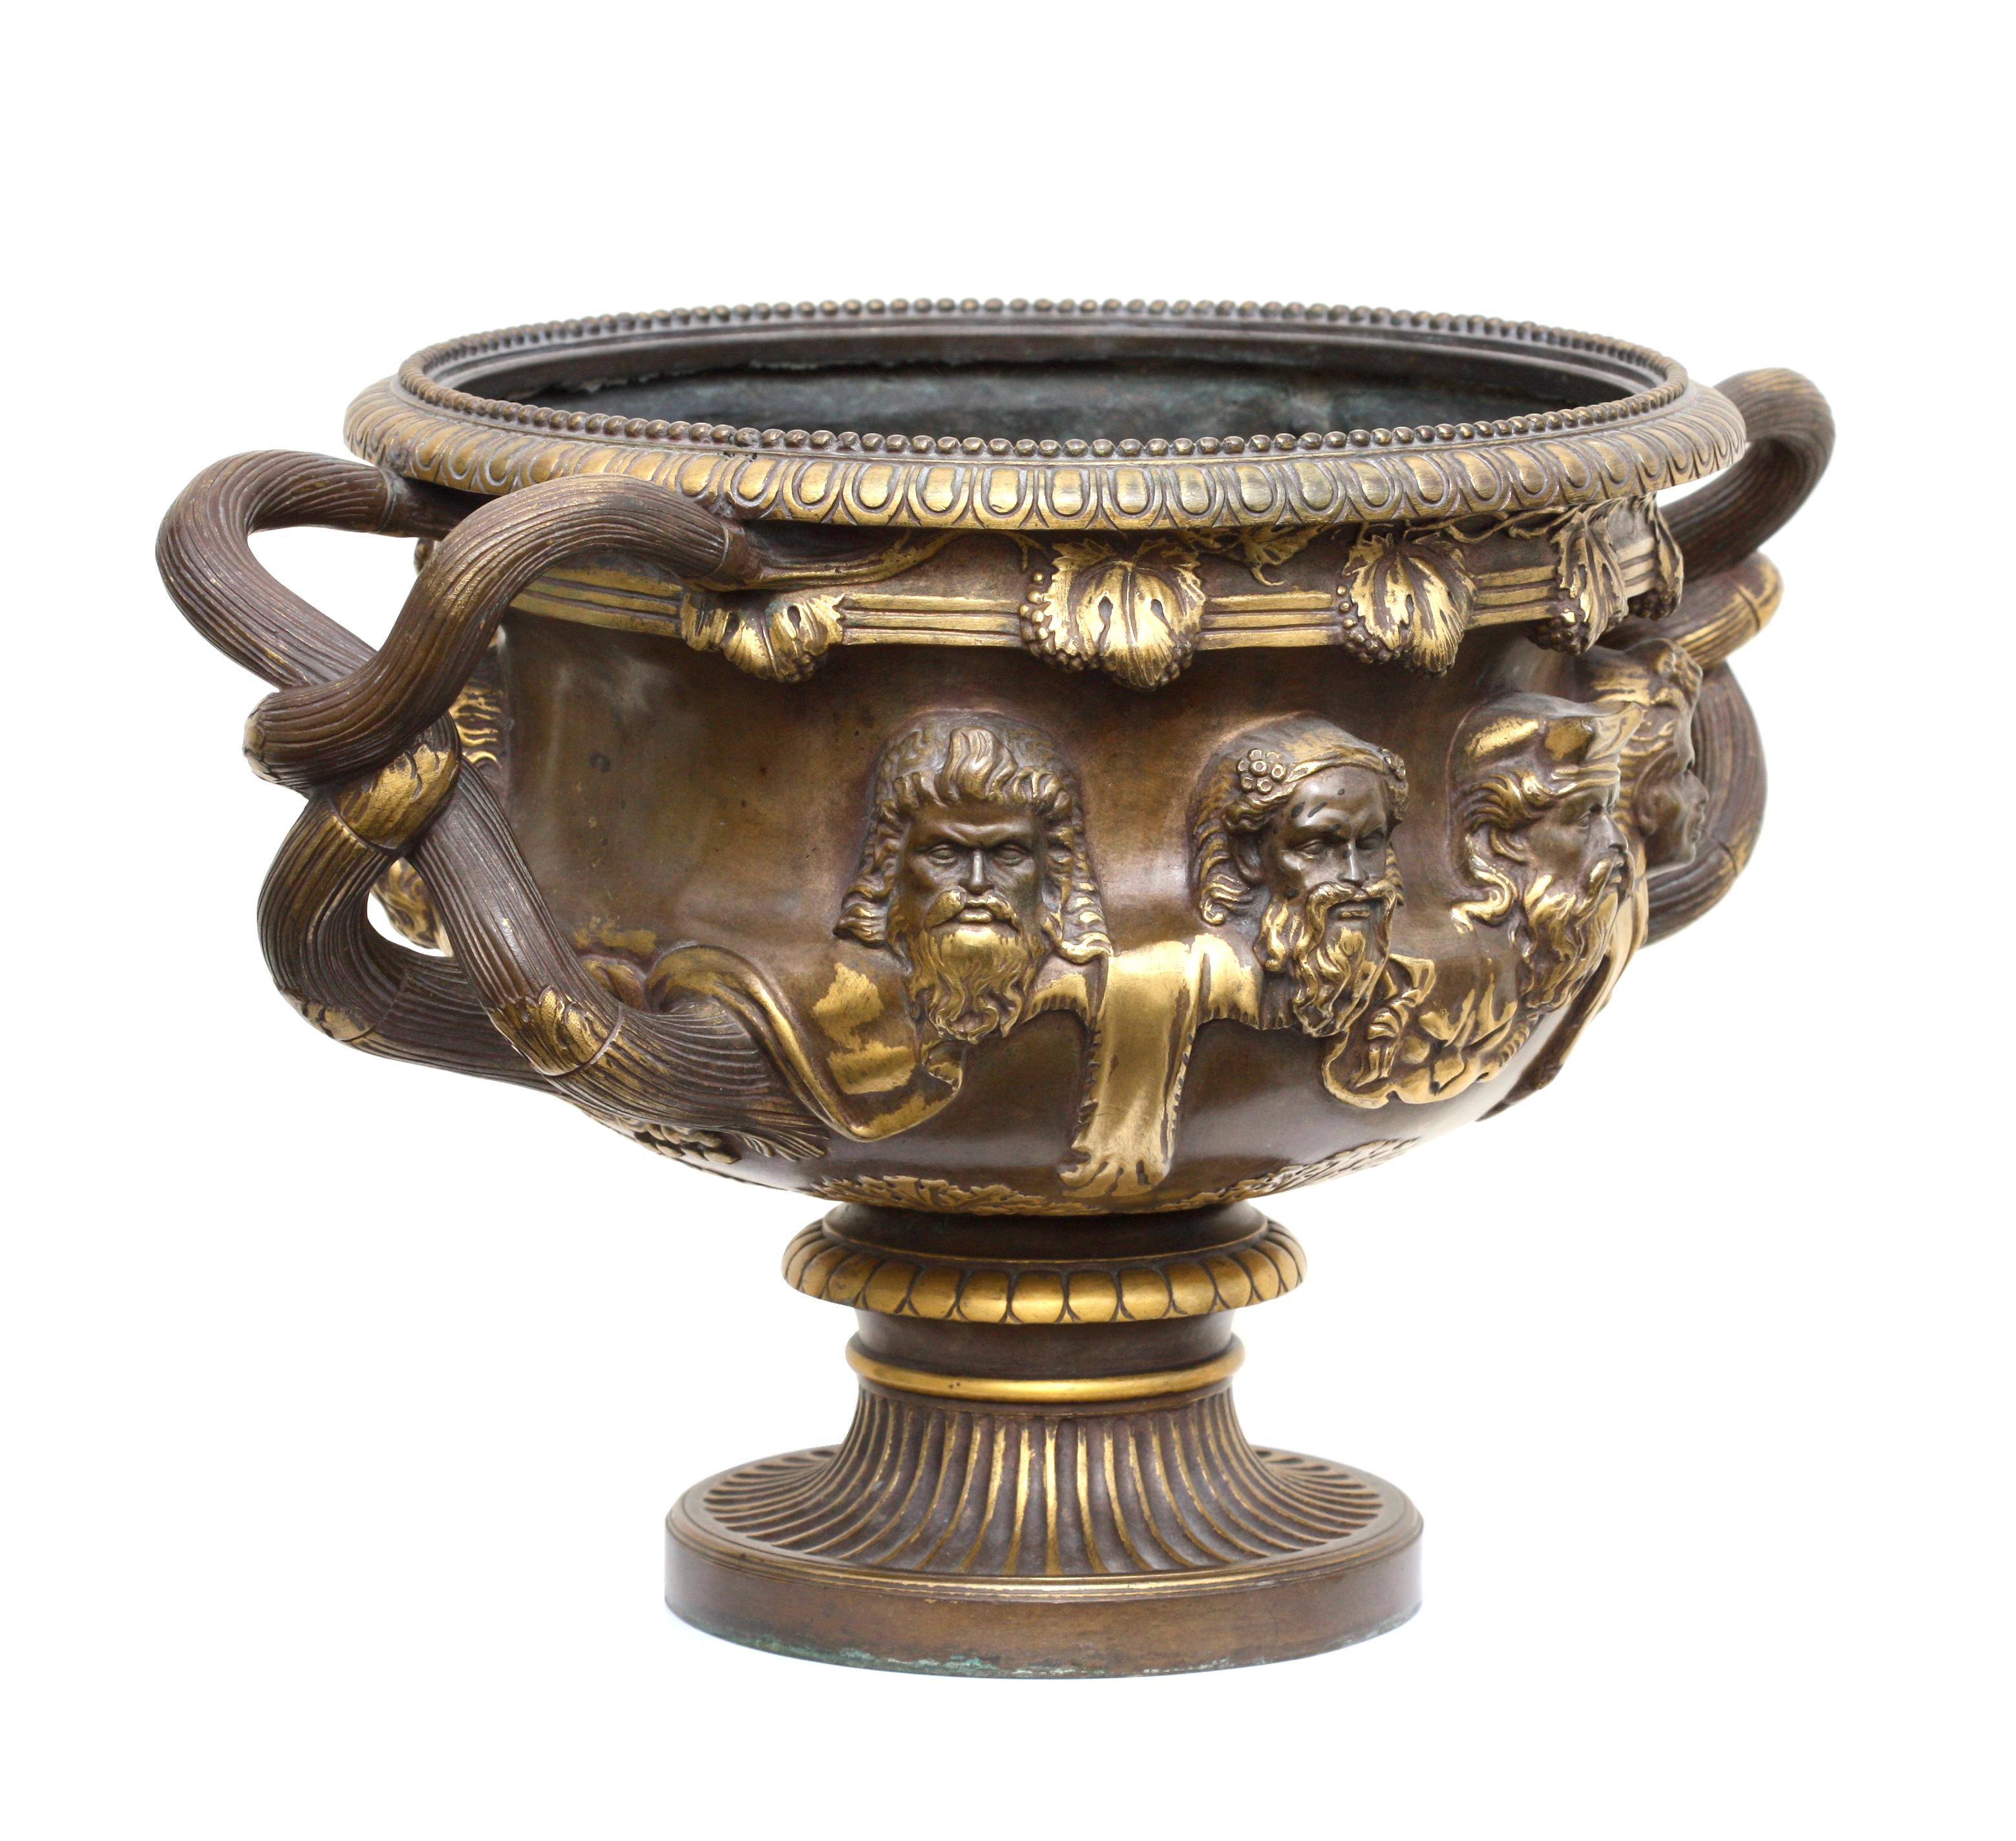 A bronze and gilt bronze 'Warwick' vase by Barbedienne, Paris, circa 1870, modeled after the original, the masks between the entwined vine handles, egg-and-dart rim, with grapevine decoration, tapering foot on a round pedestal,
Measures: Height 11